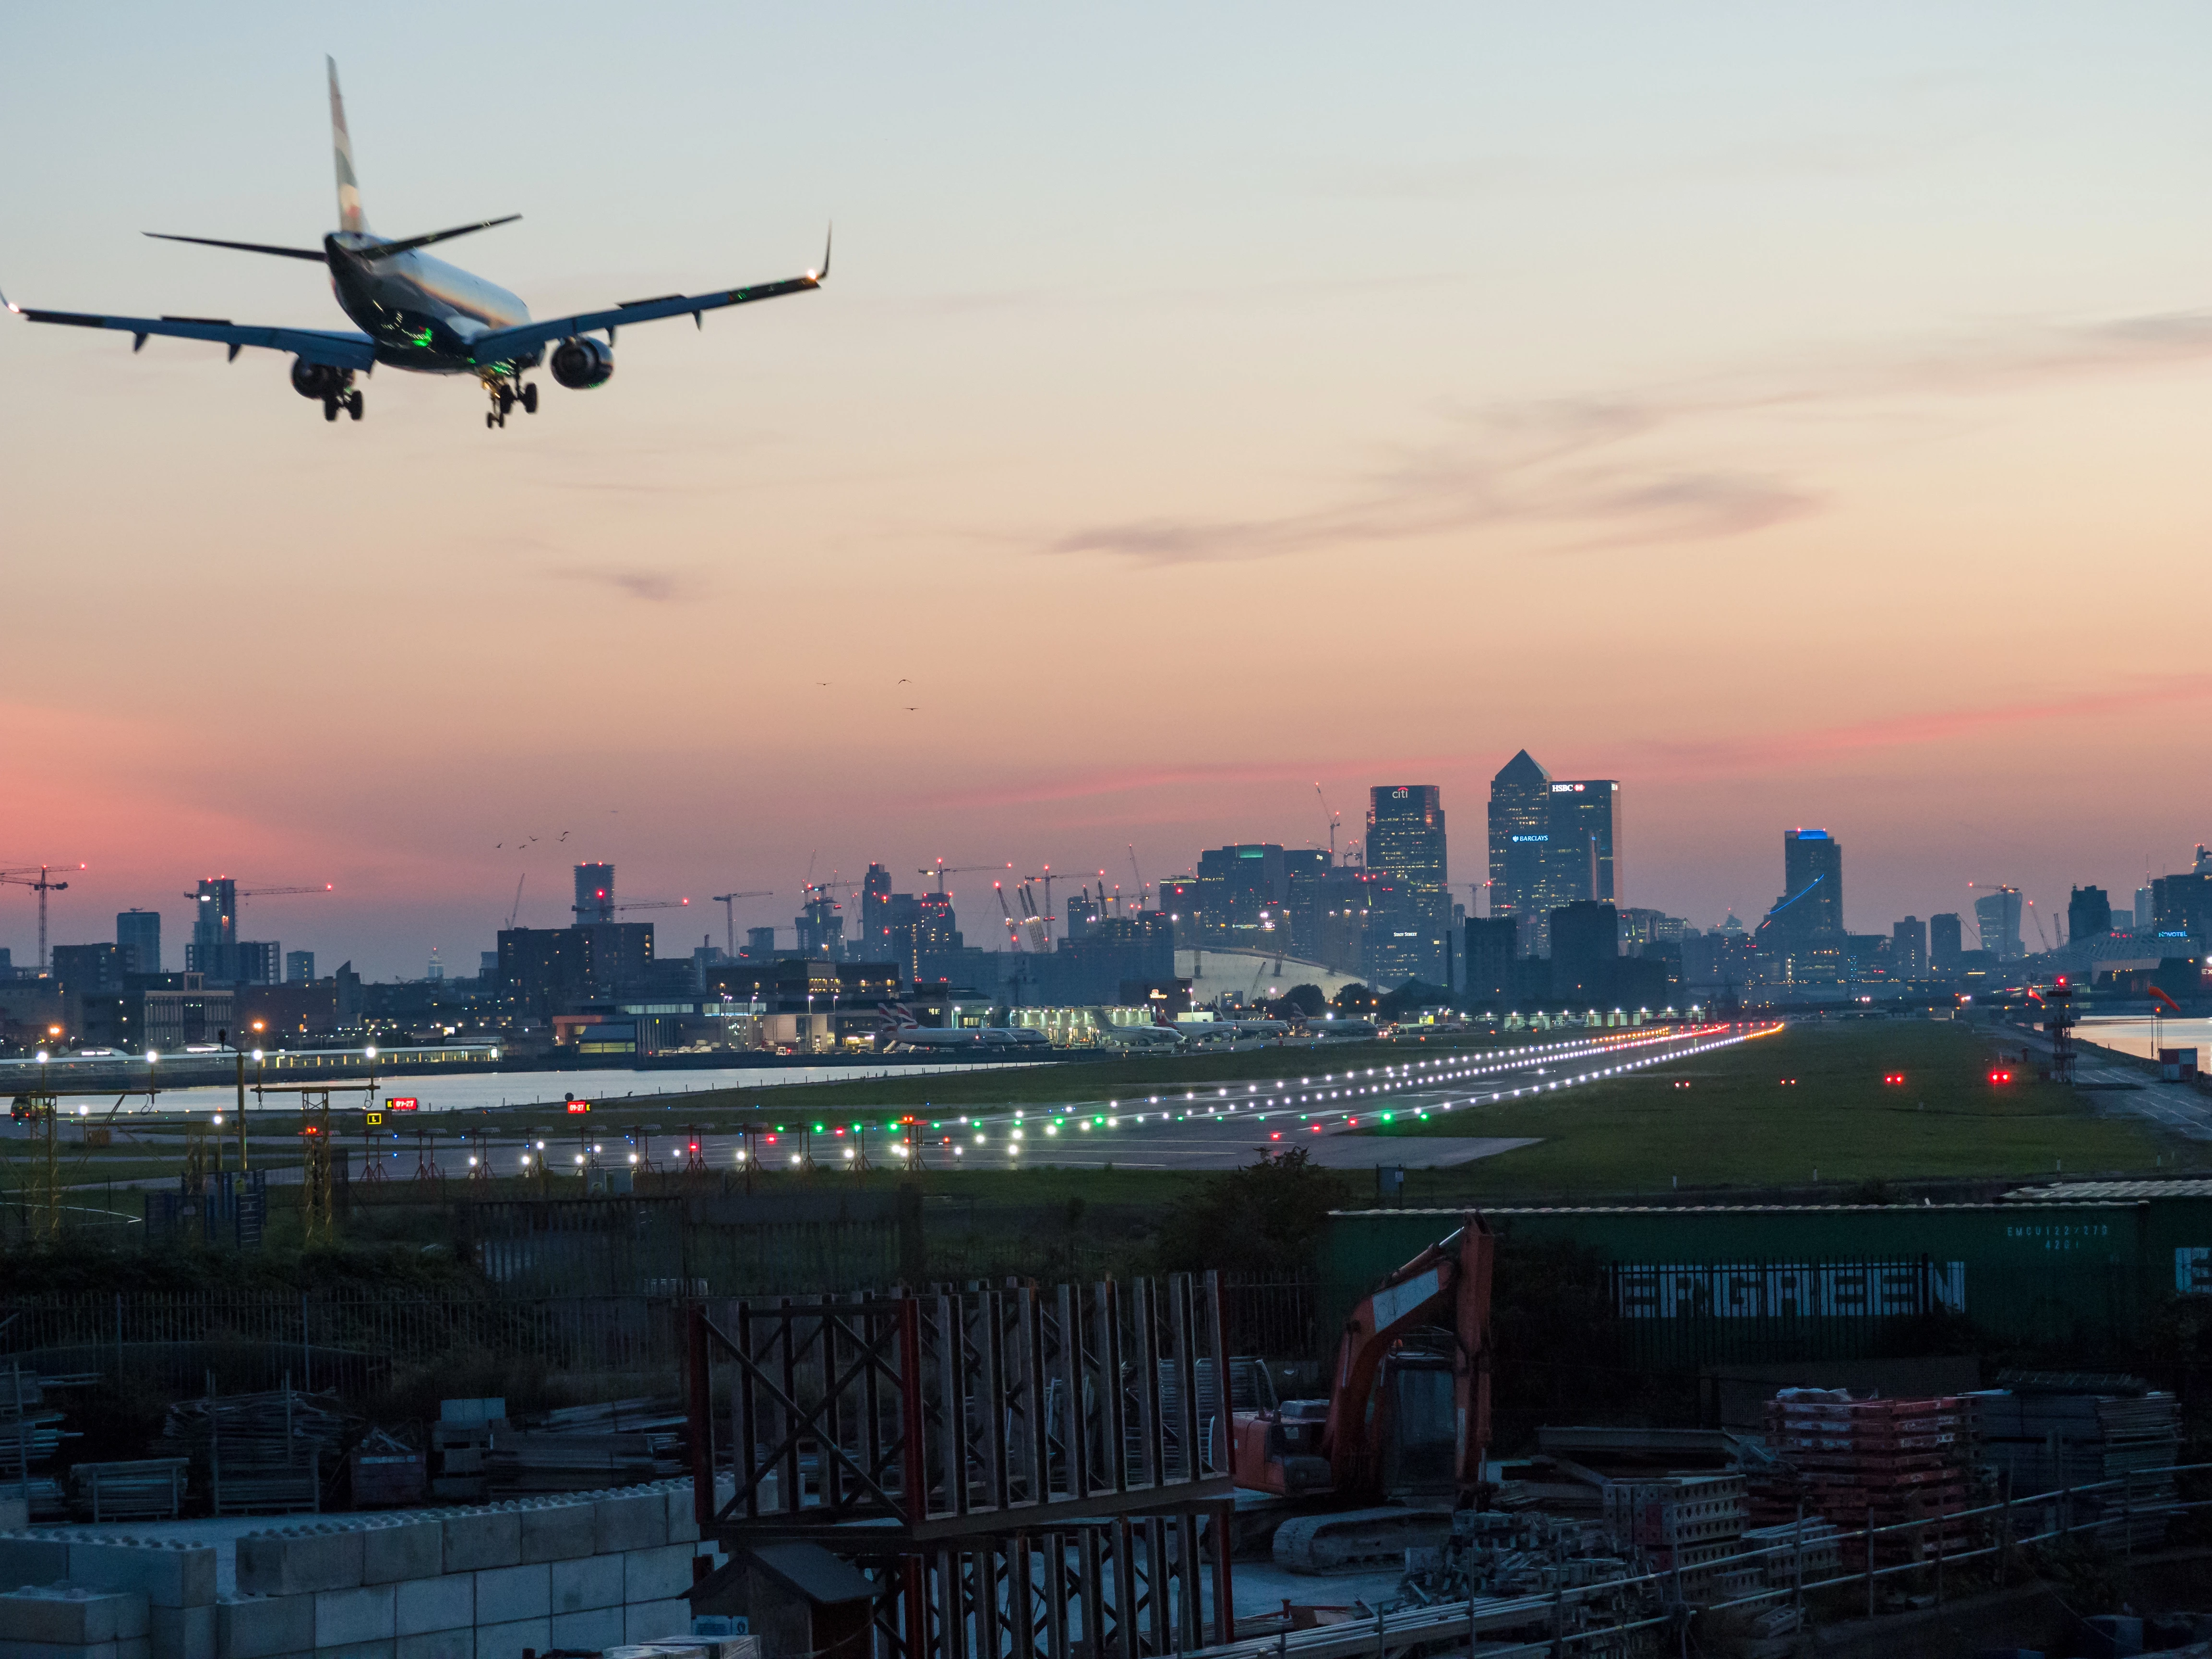 London City Airport at sunset